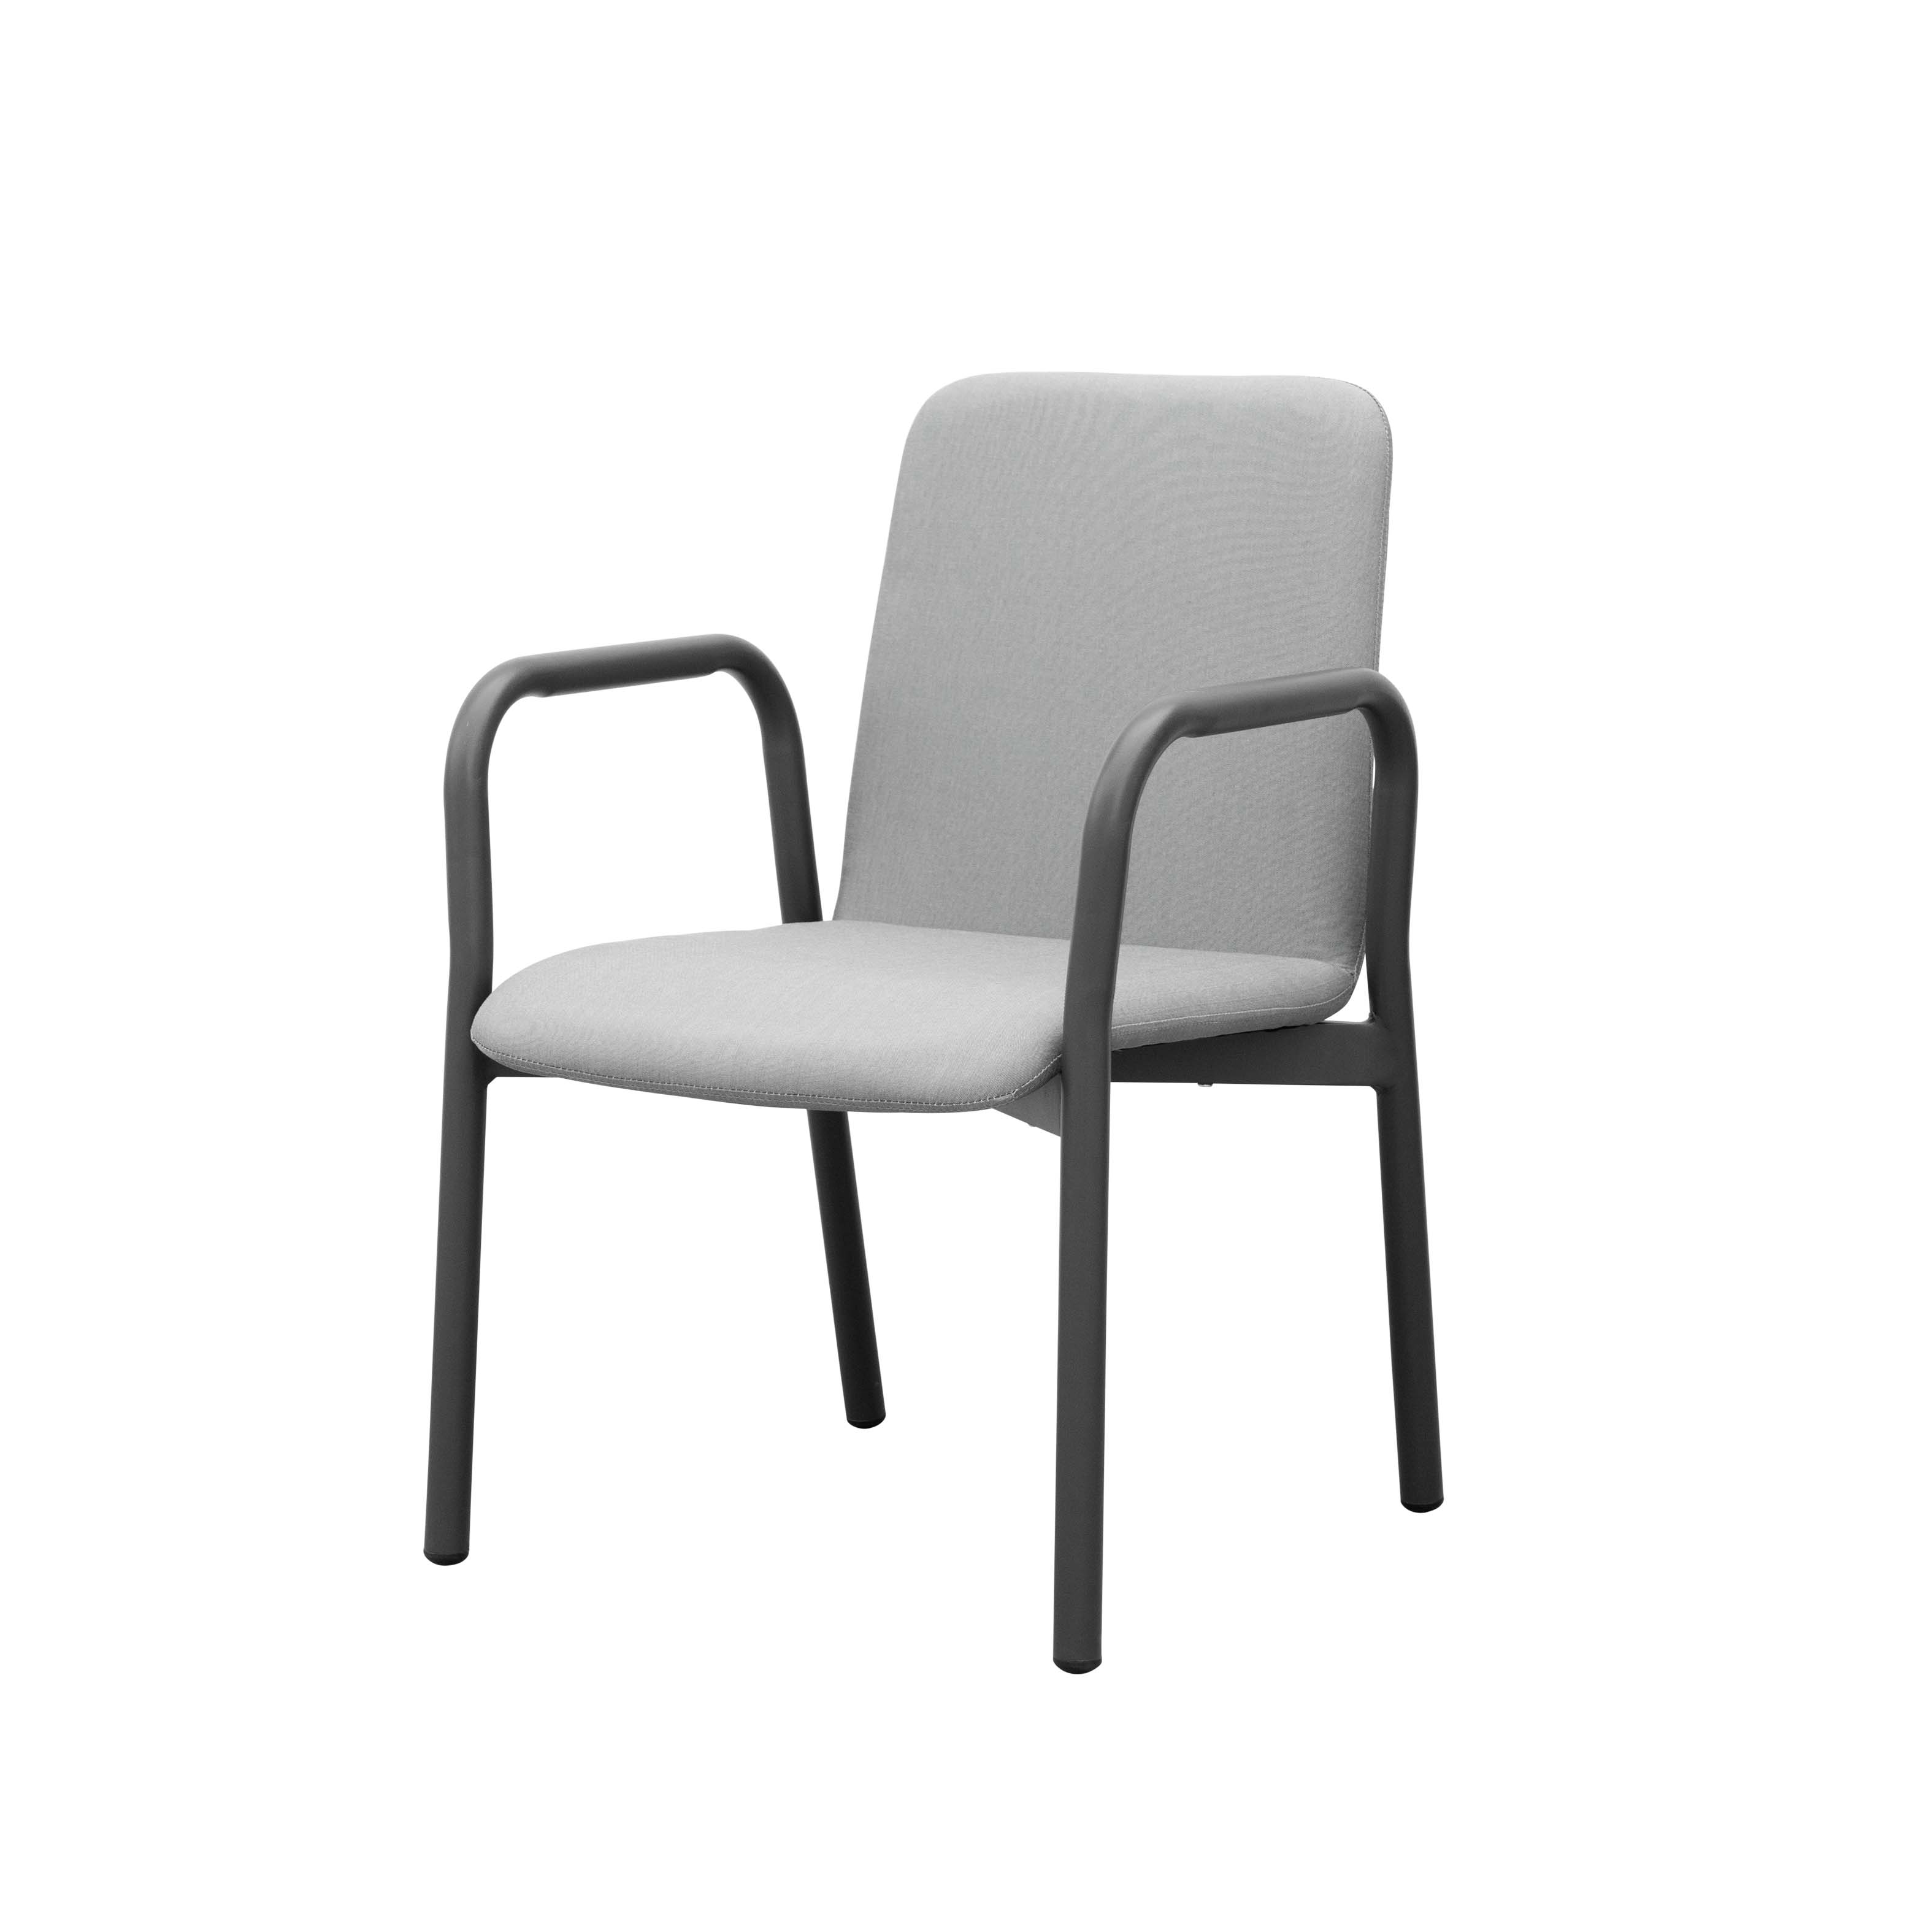 Houston fabric dining chair S4